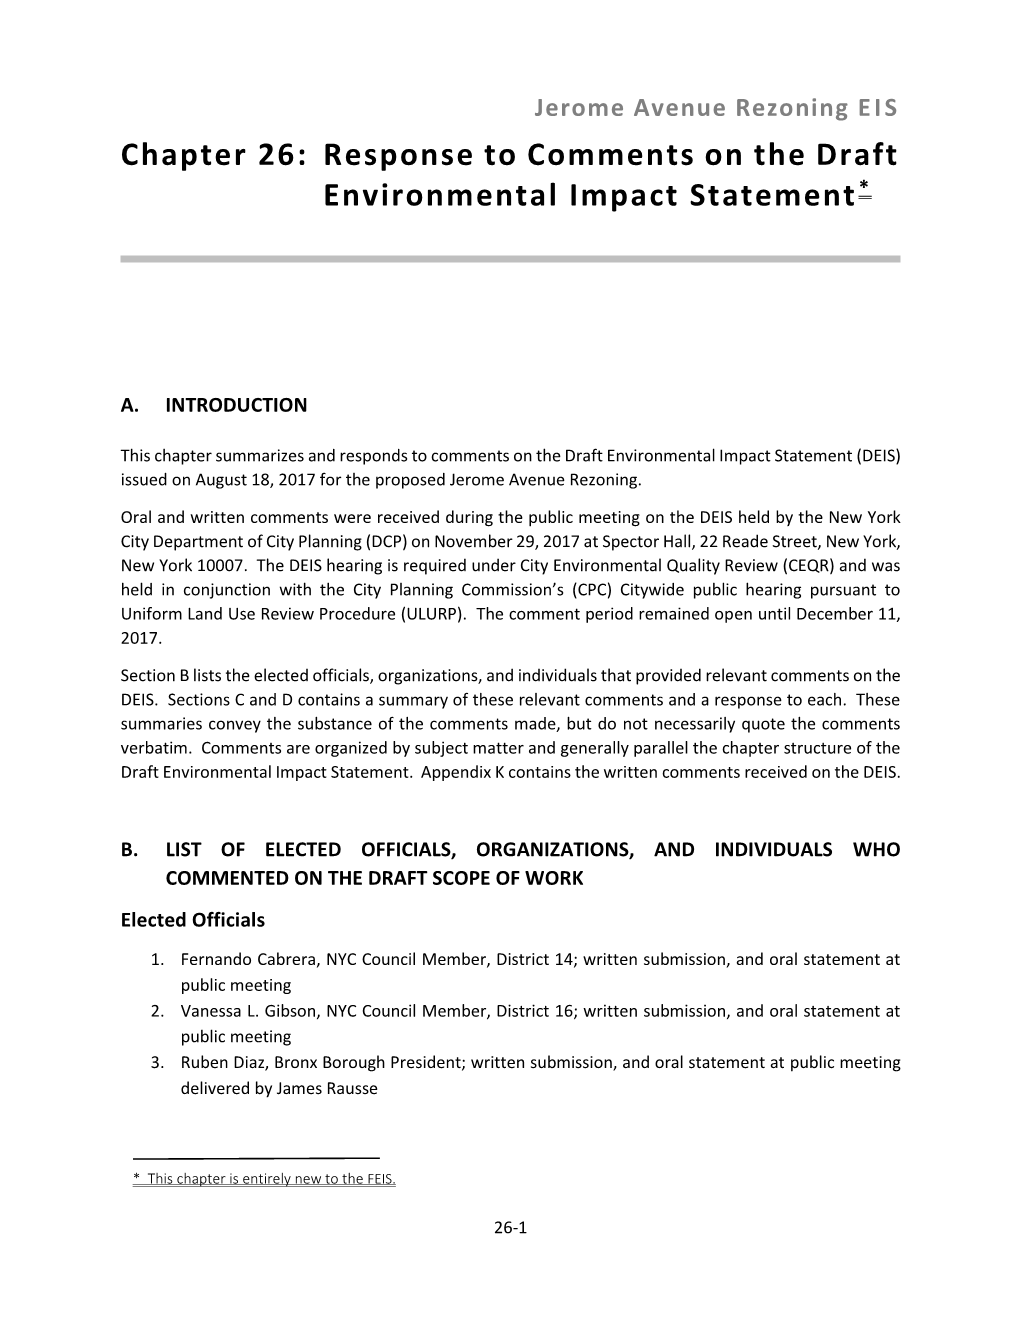 Chapter 26: Response to Comments on the Draft Environmental Impact Statement *